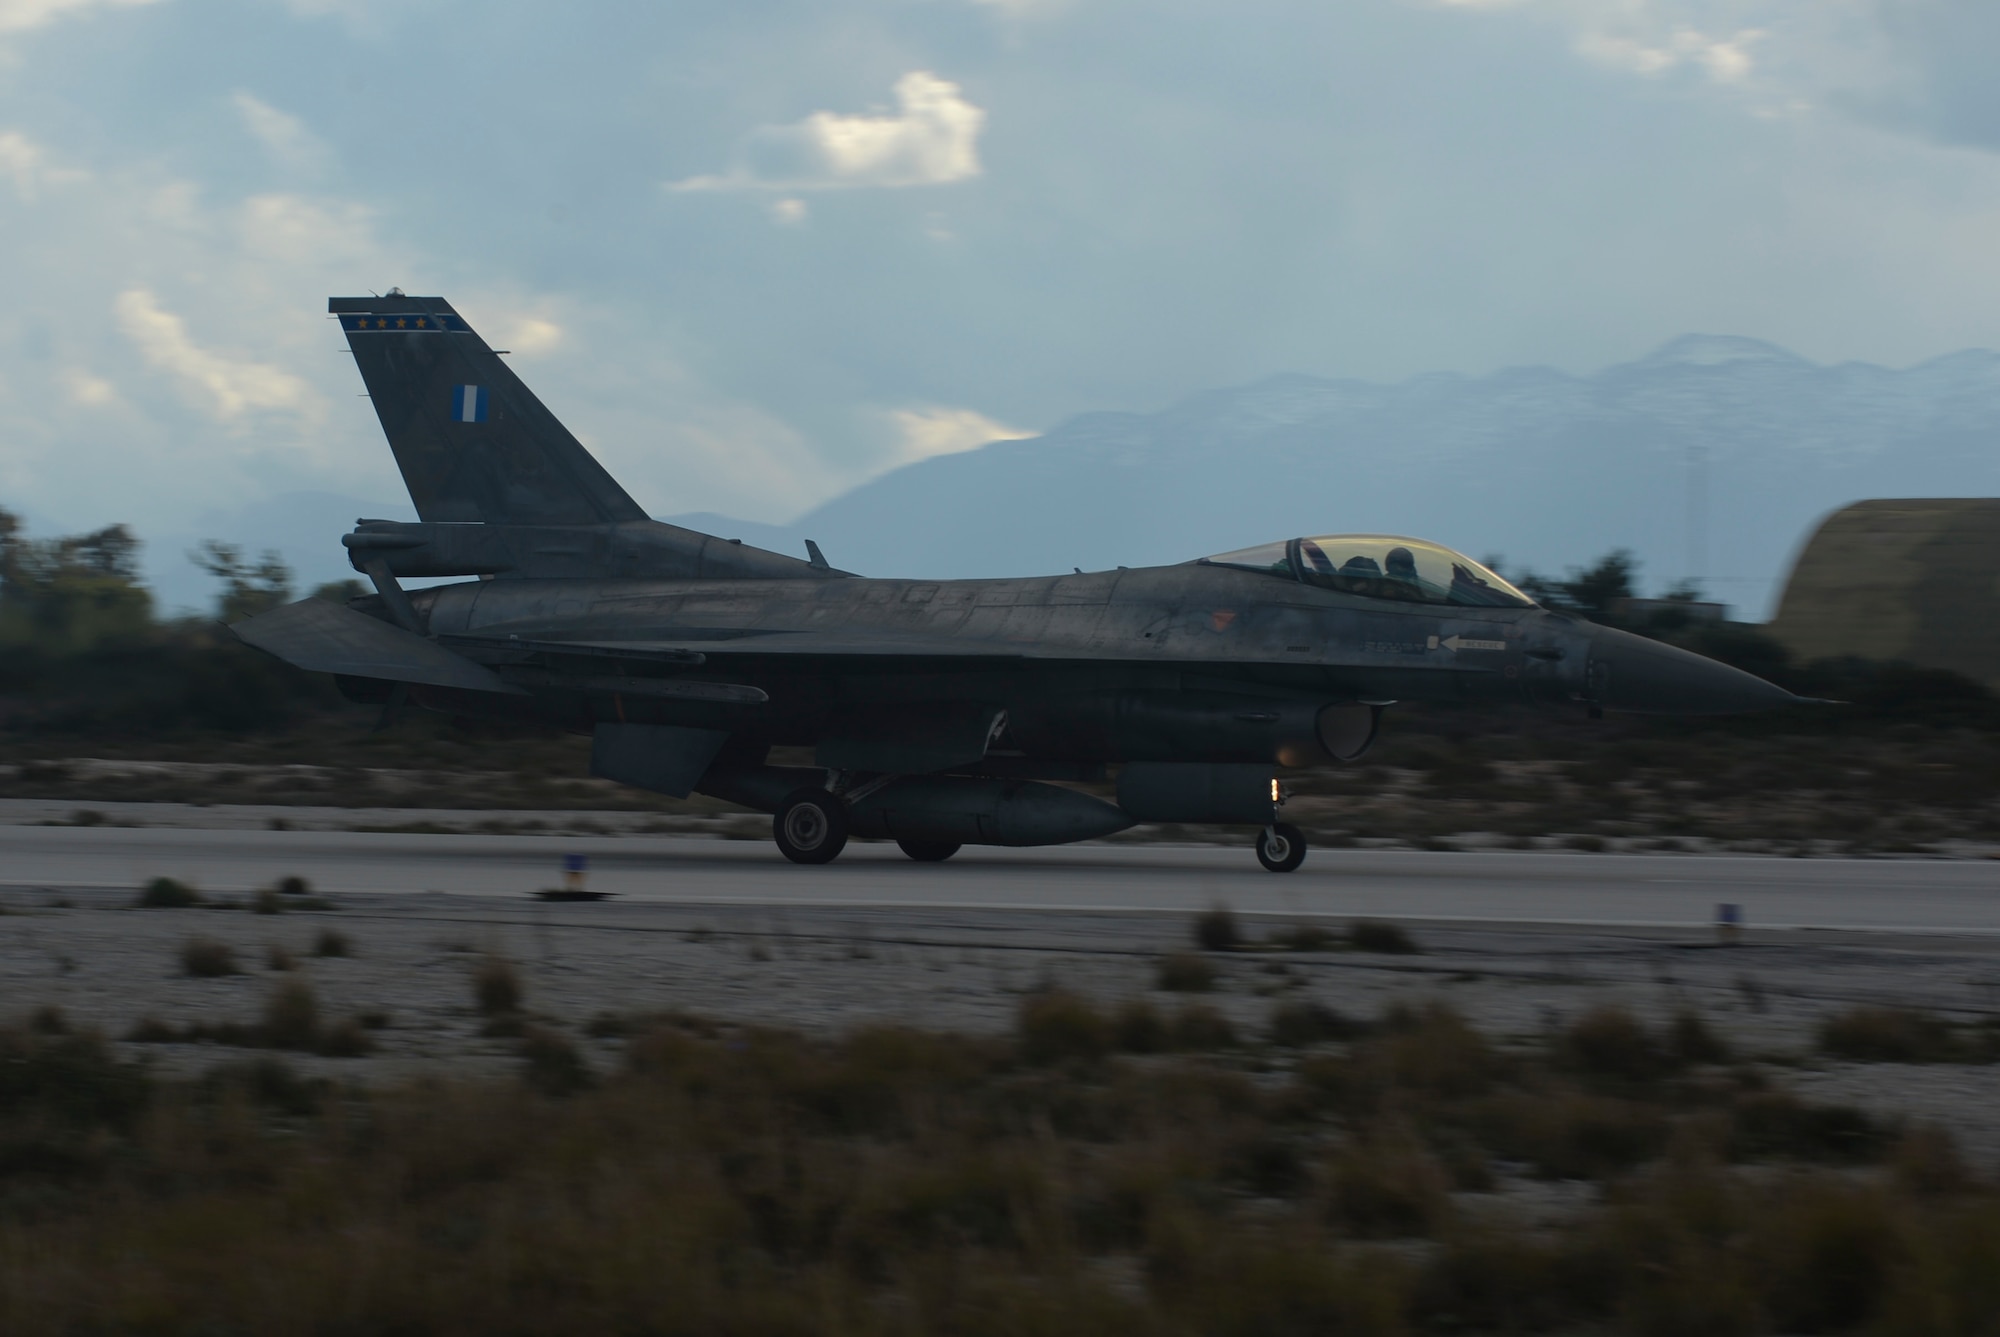 A Hellenic air force F-16 Fighting Falcon fighter aircraft from the 343rd Fighter Squadron lands on the flightline January 26, 2015, at Souda Bay, Greece. The aircraft flew during training operations as part of a flying training deployment between the Greek and U.S. air forces. (U.S. Air Force photo/Staff Sgt. Joe W. McFadden)